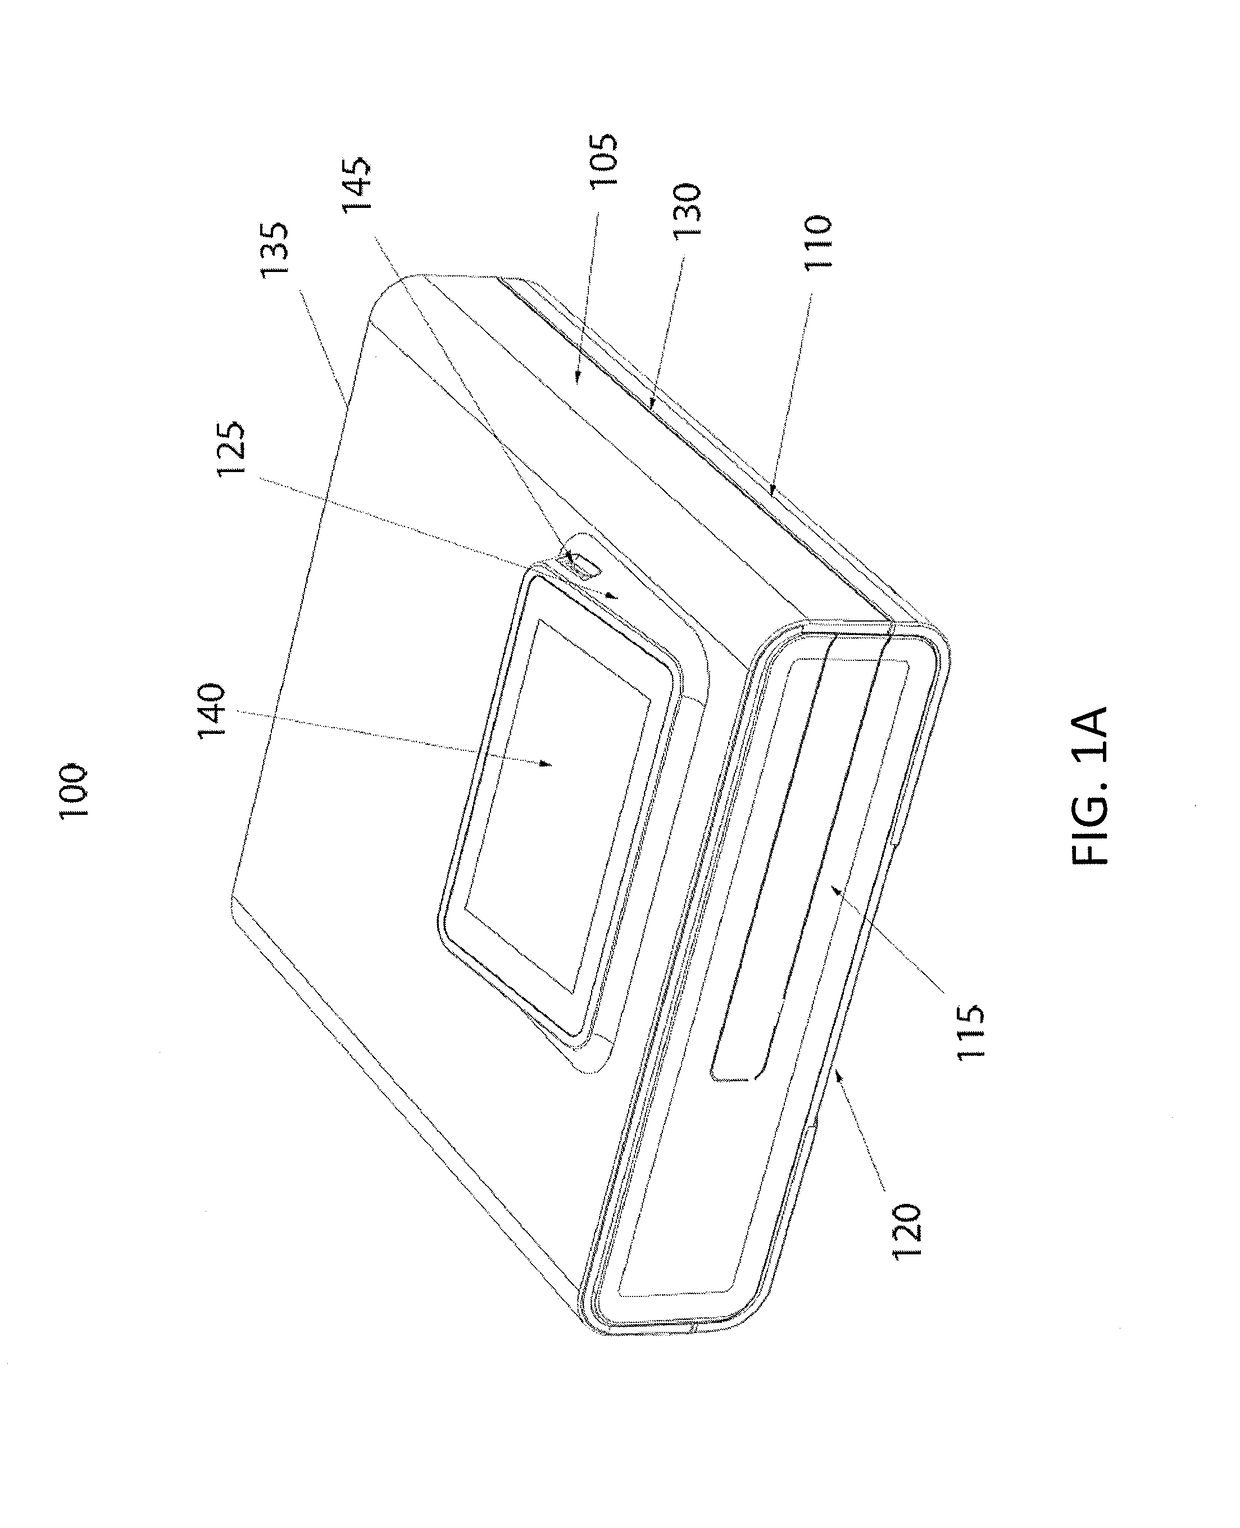 Systems, devices, and methods for automated thawing of bag-format storage vessels